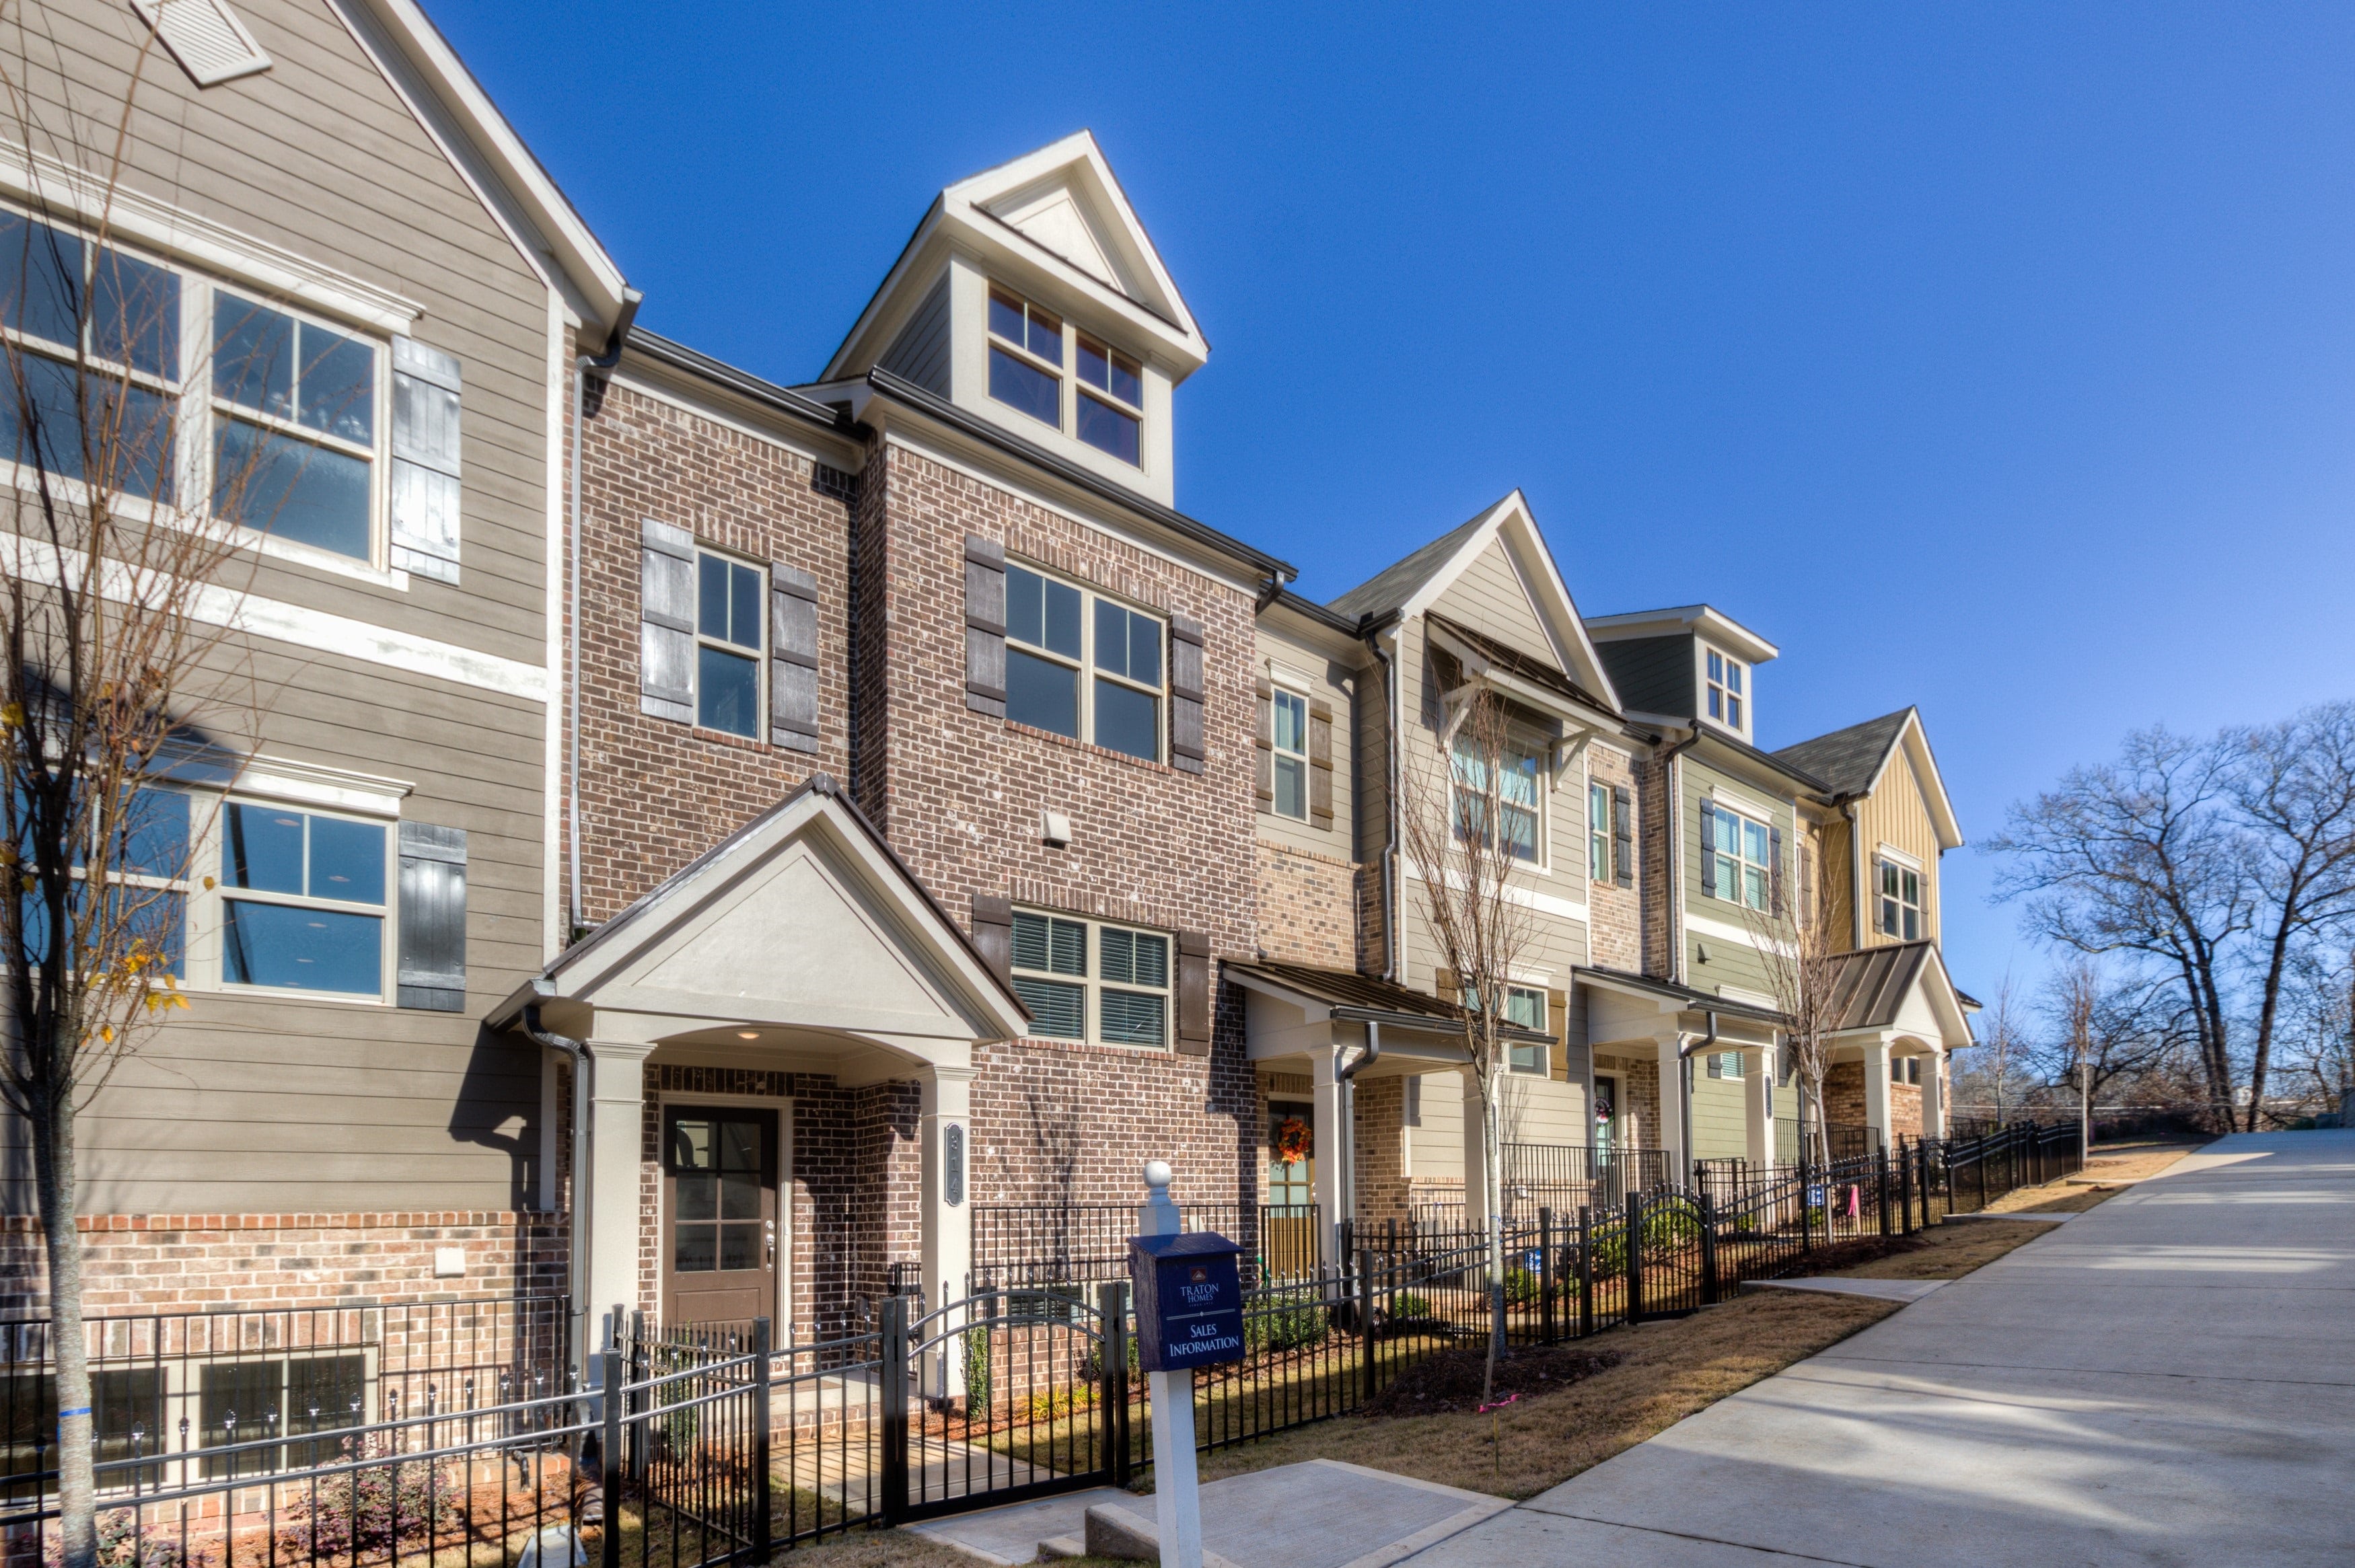 28 and Mill townhomes in downtown woodstock